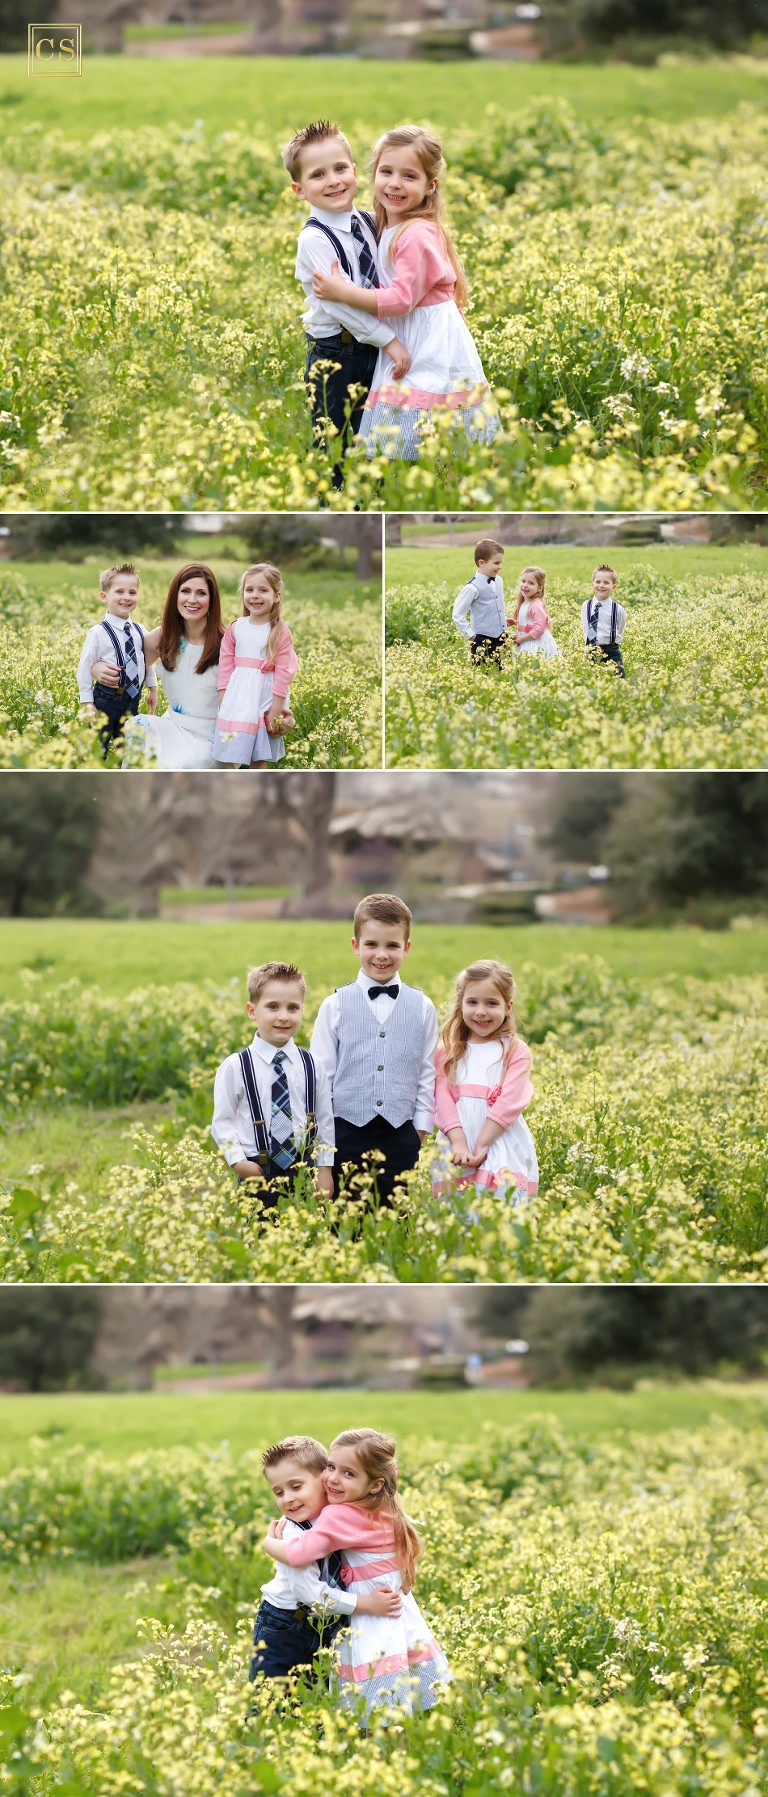 Spring flowers in Folsom for family pictures with Family Photographer Colleen Sanders, based out of El Dorado Hills - yellow spring flowers and kids in yellow flowers with their mommy